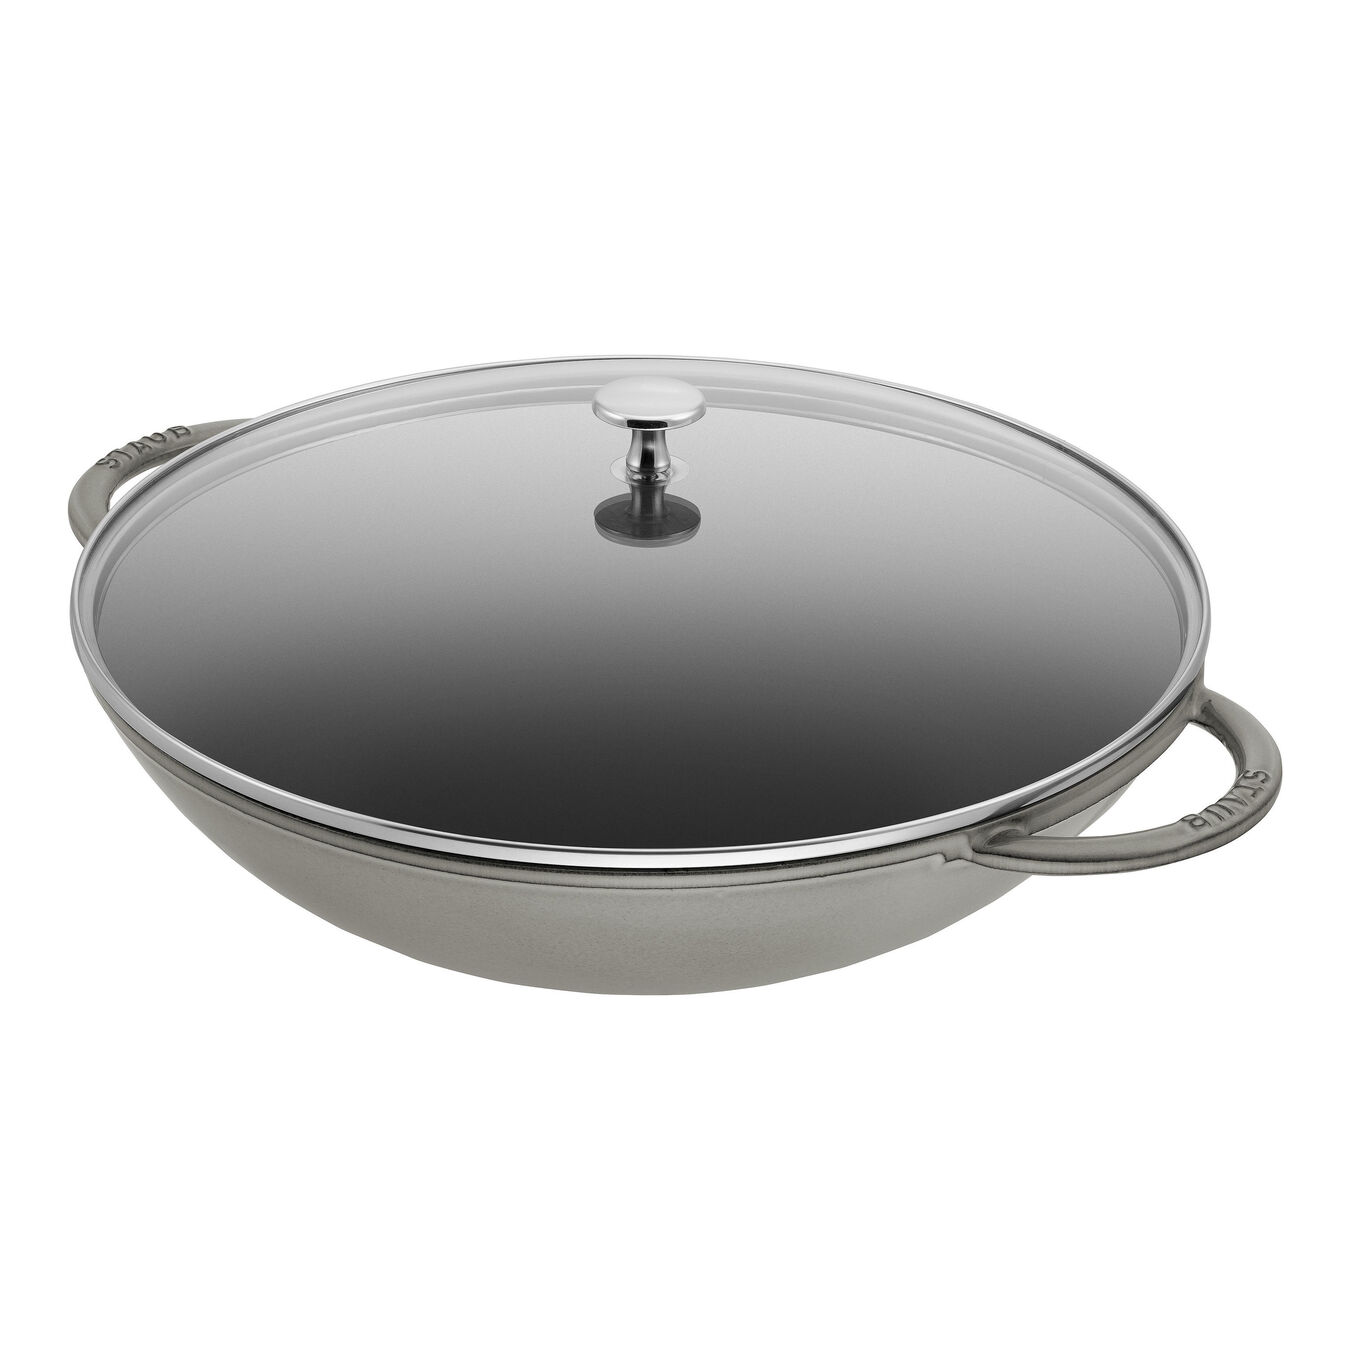 37 cm / 14.5 inch cast iron Wok with glass lid, graphite-grey,,large 1